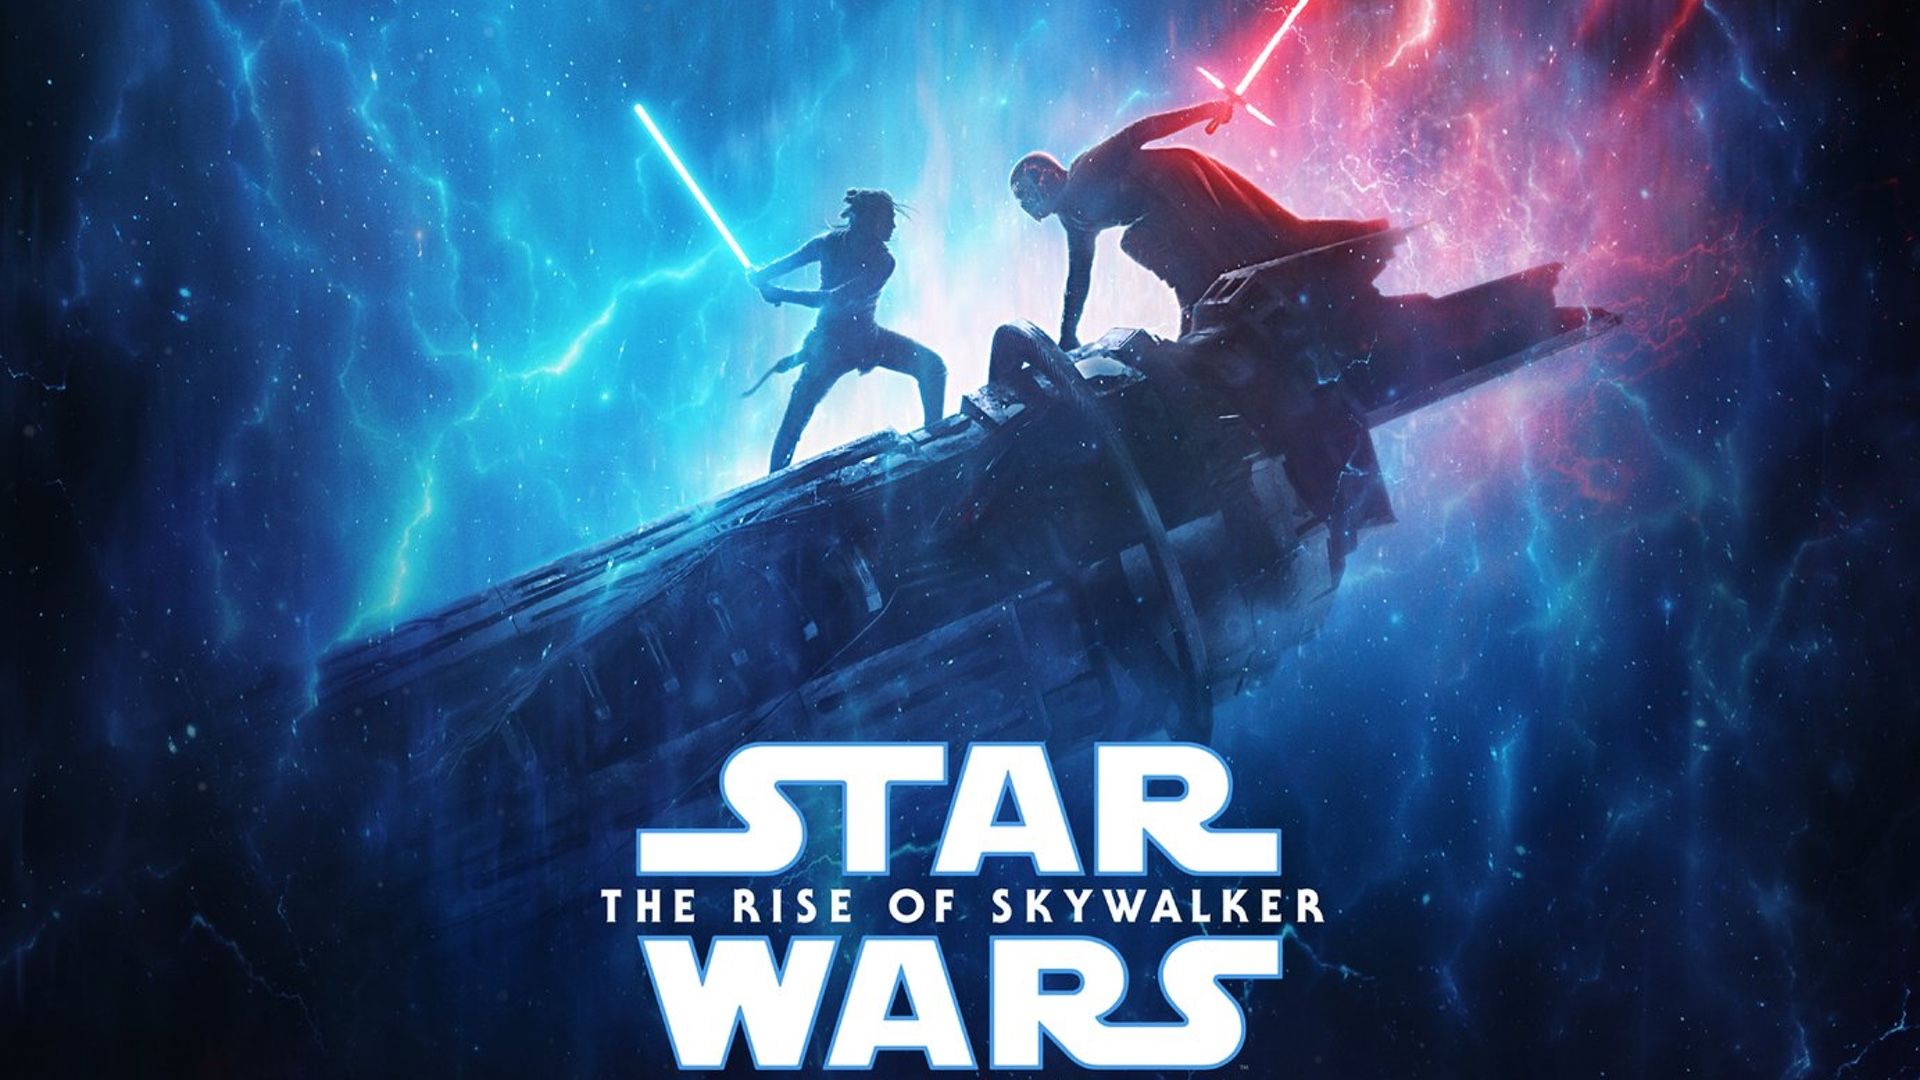 Lucasfilm Releases a Cool New Poster For STAR WARS: THE RISE OF